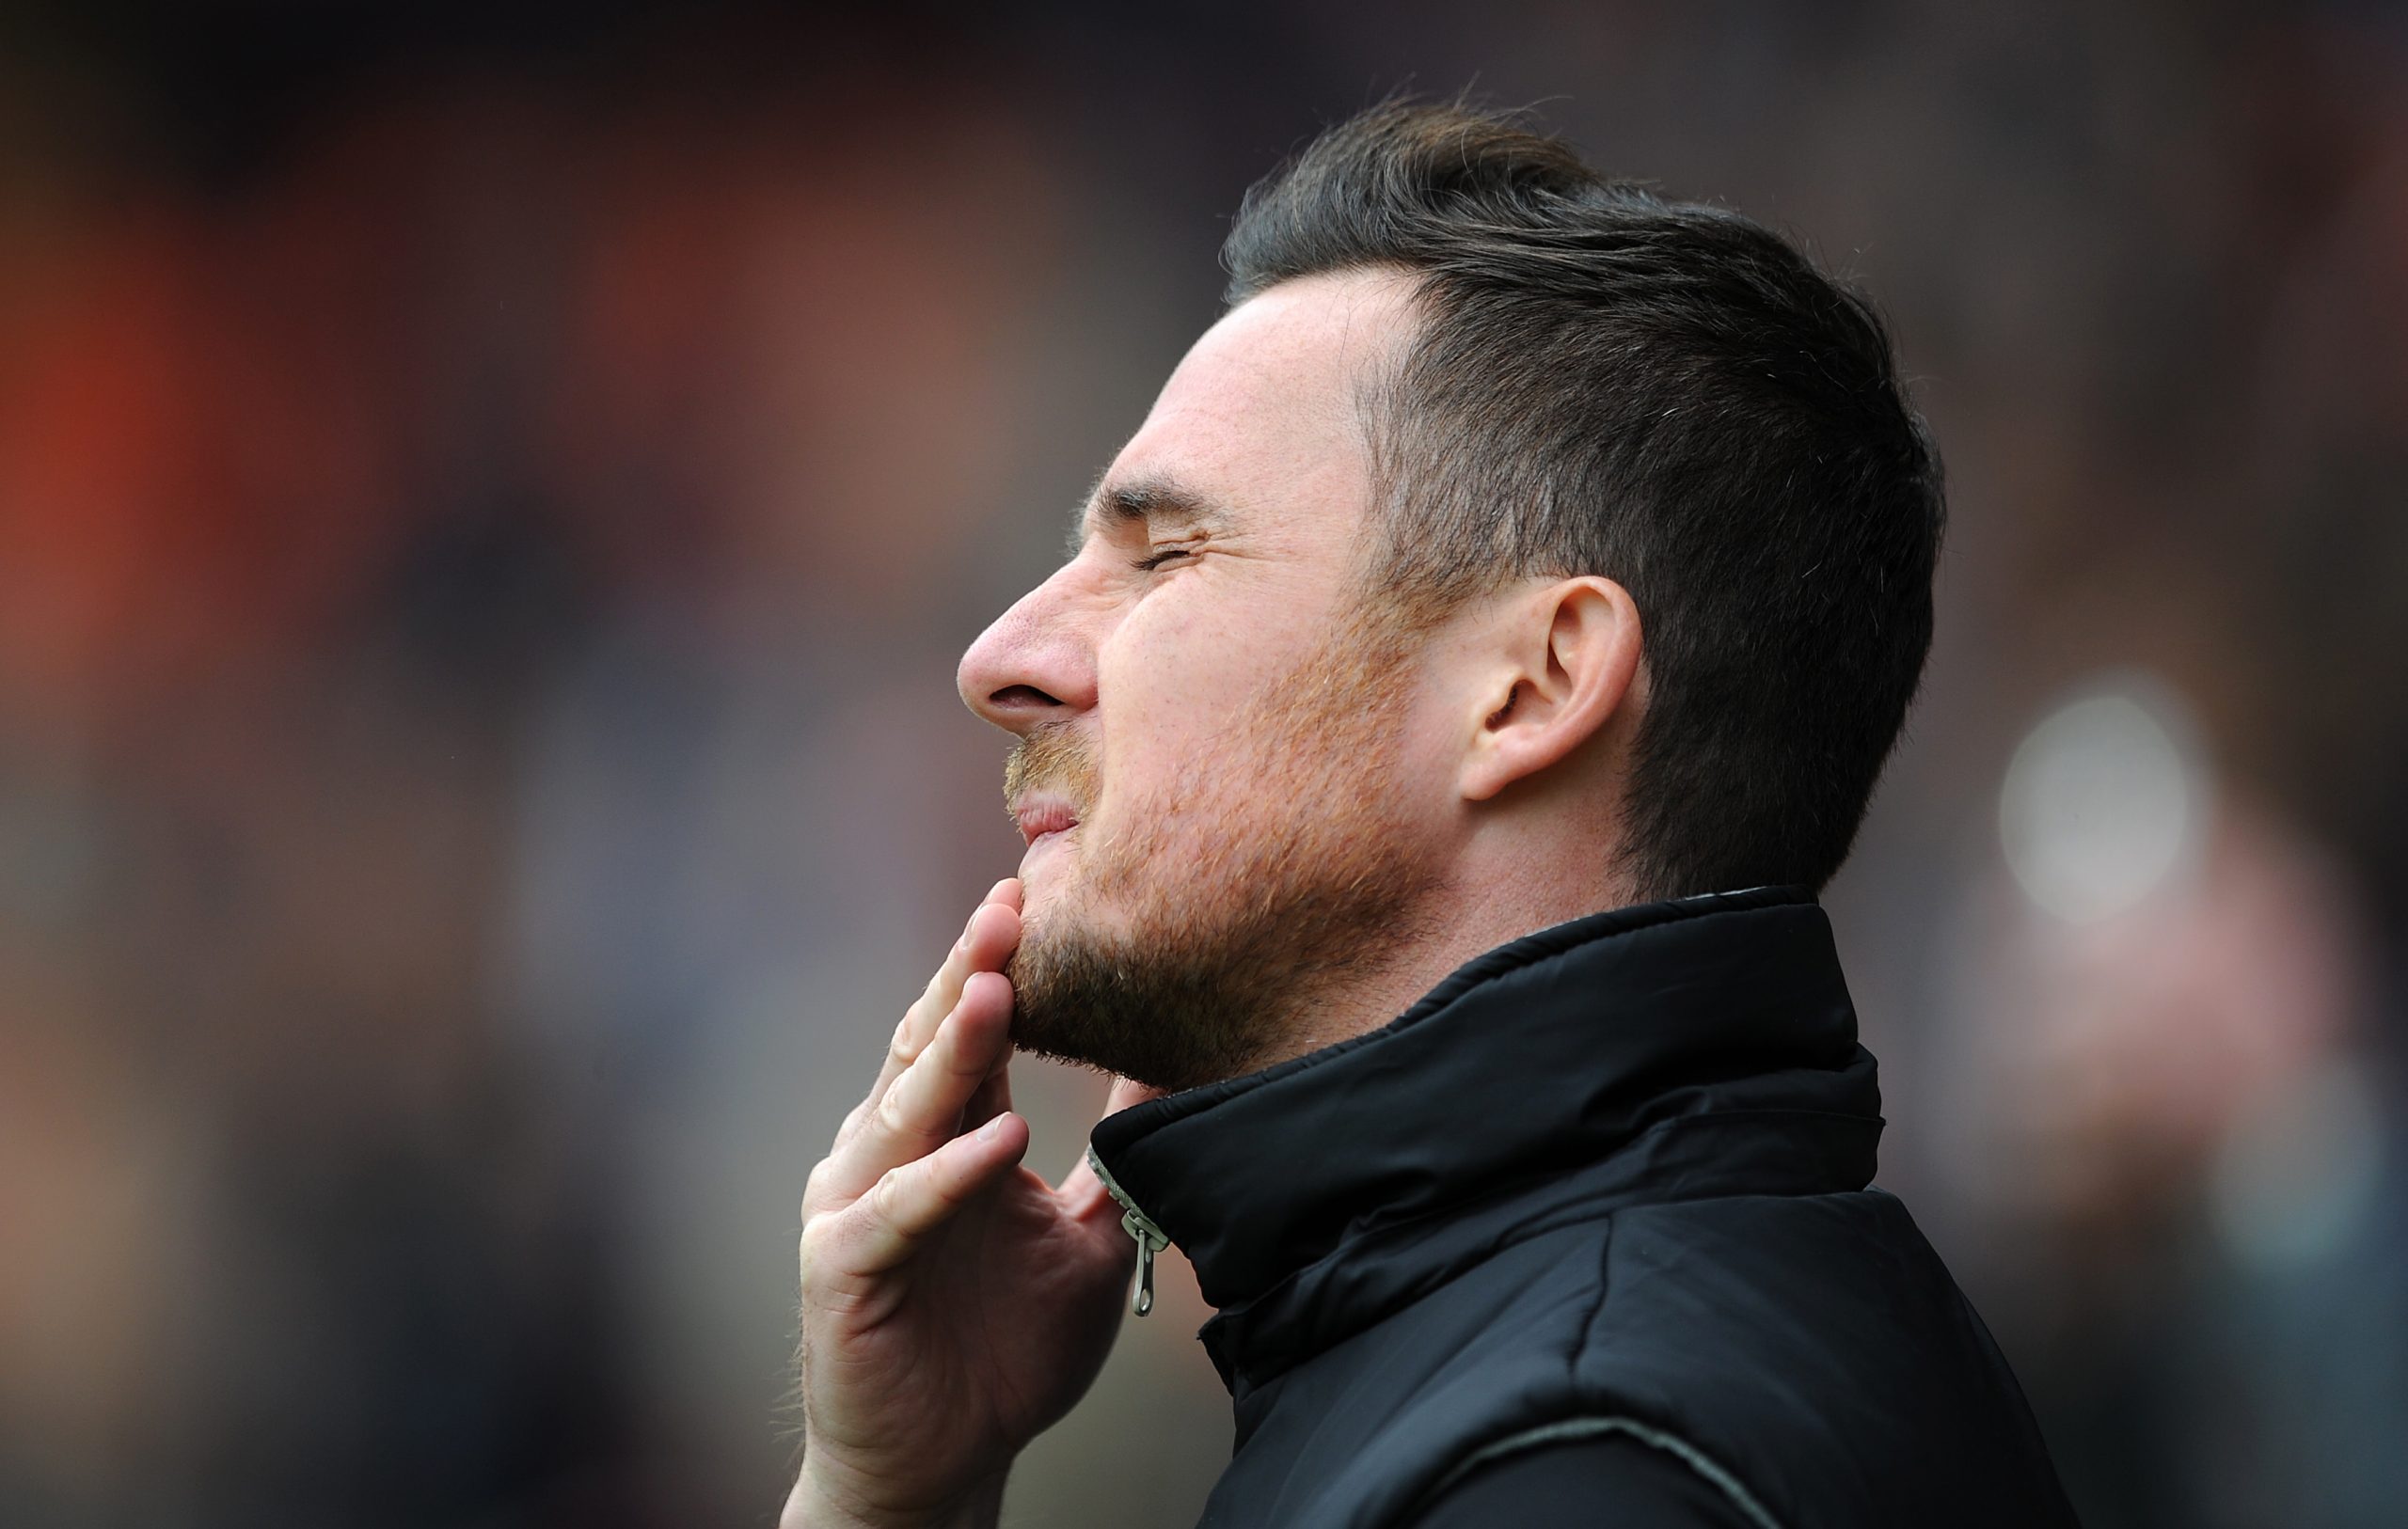 BLACKPOOL, ENGLAND - MAY 03: Blackpool manager Barry Ferguson reacts during the Sky Bet Championship match between Blackpool and Charlton Athletic at Bloomfield Road on May 03, 2014 in Blackpool, England.